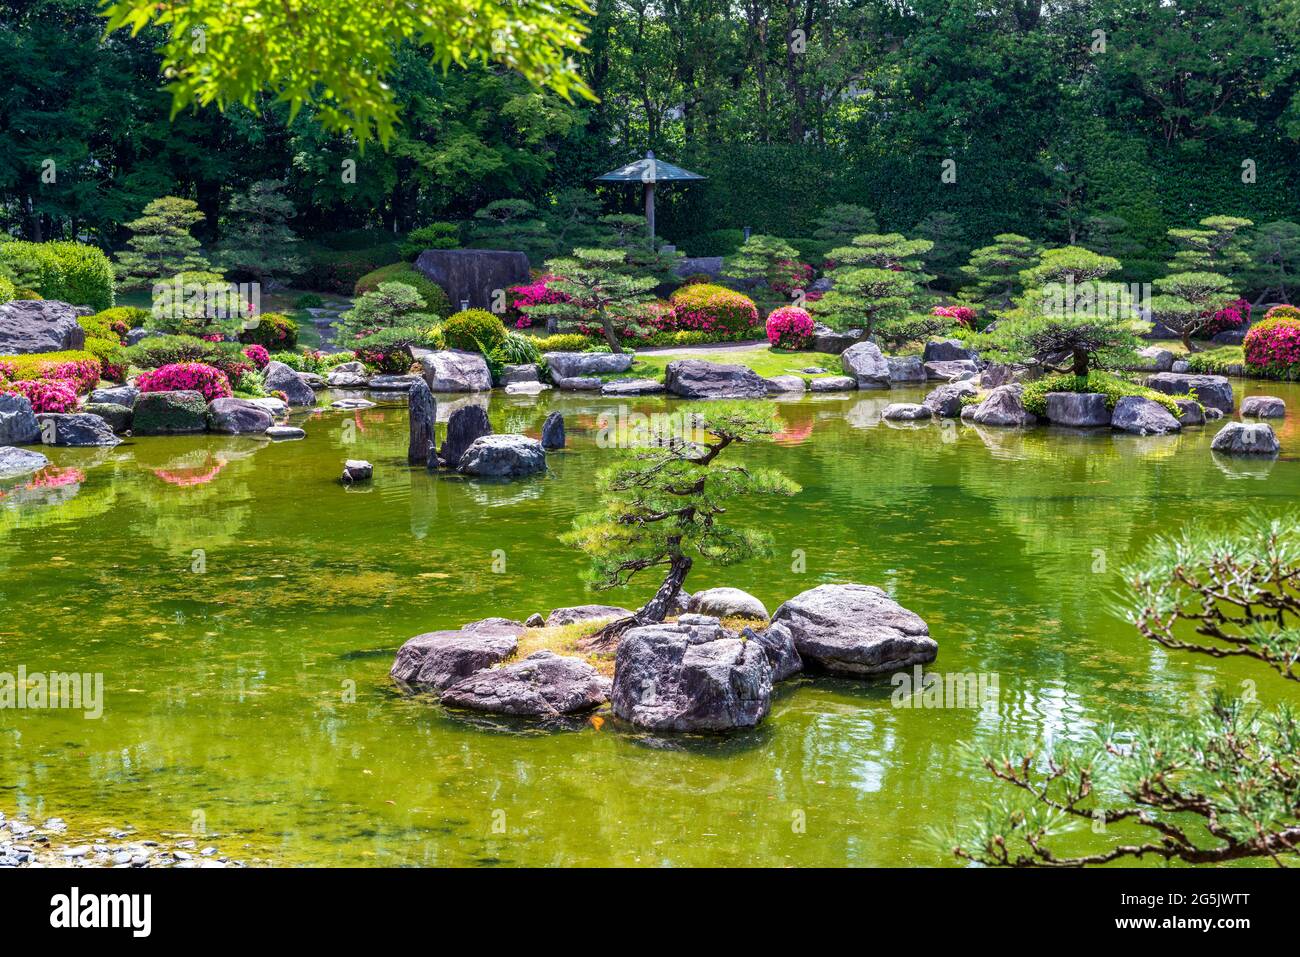 Public japanese garden in Fukuoka city, lake, island, bonsai trees, and blooming rhododendrons Stock Photo